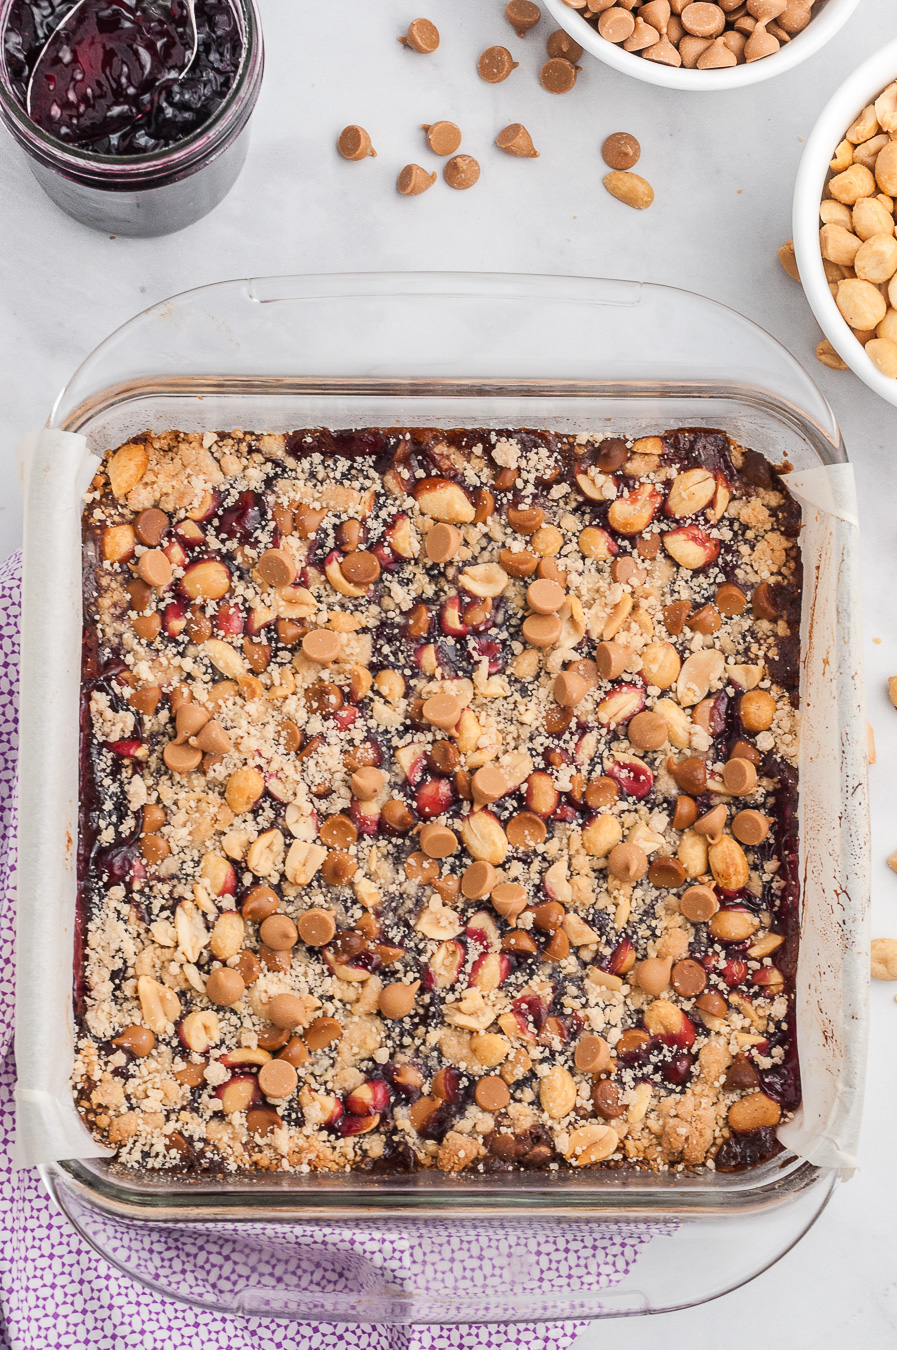 over the top view of a baking dish with baked dessert bars inside covered with chopped nuts, jelly and